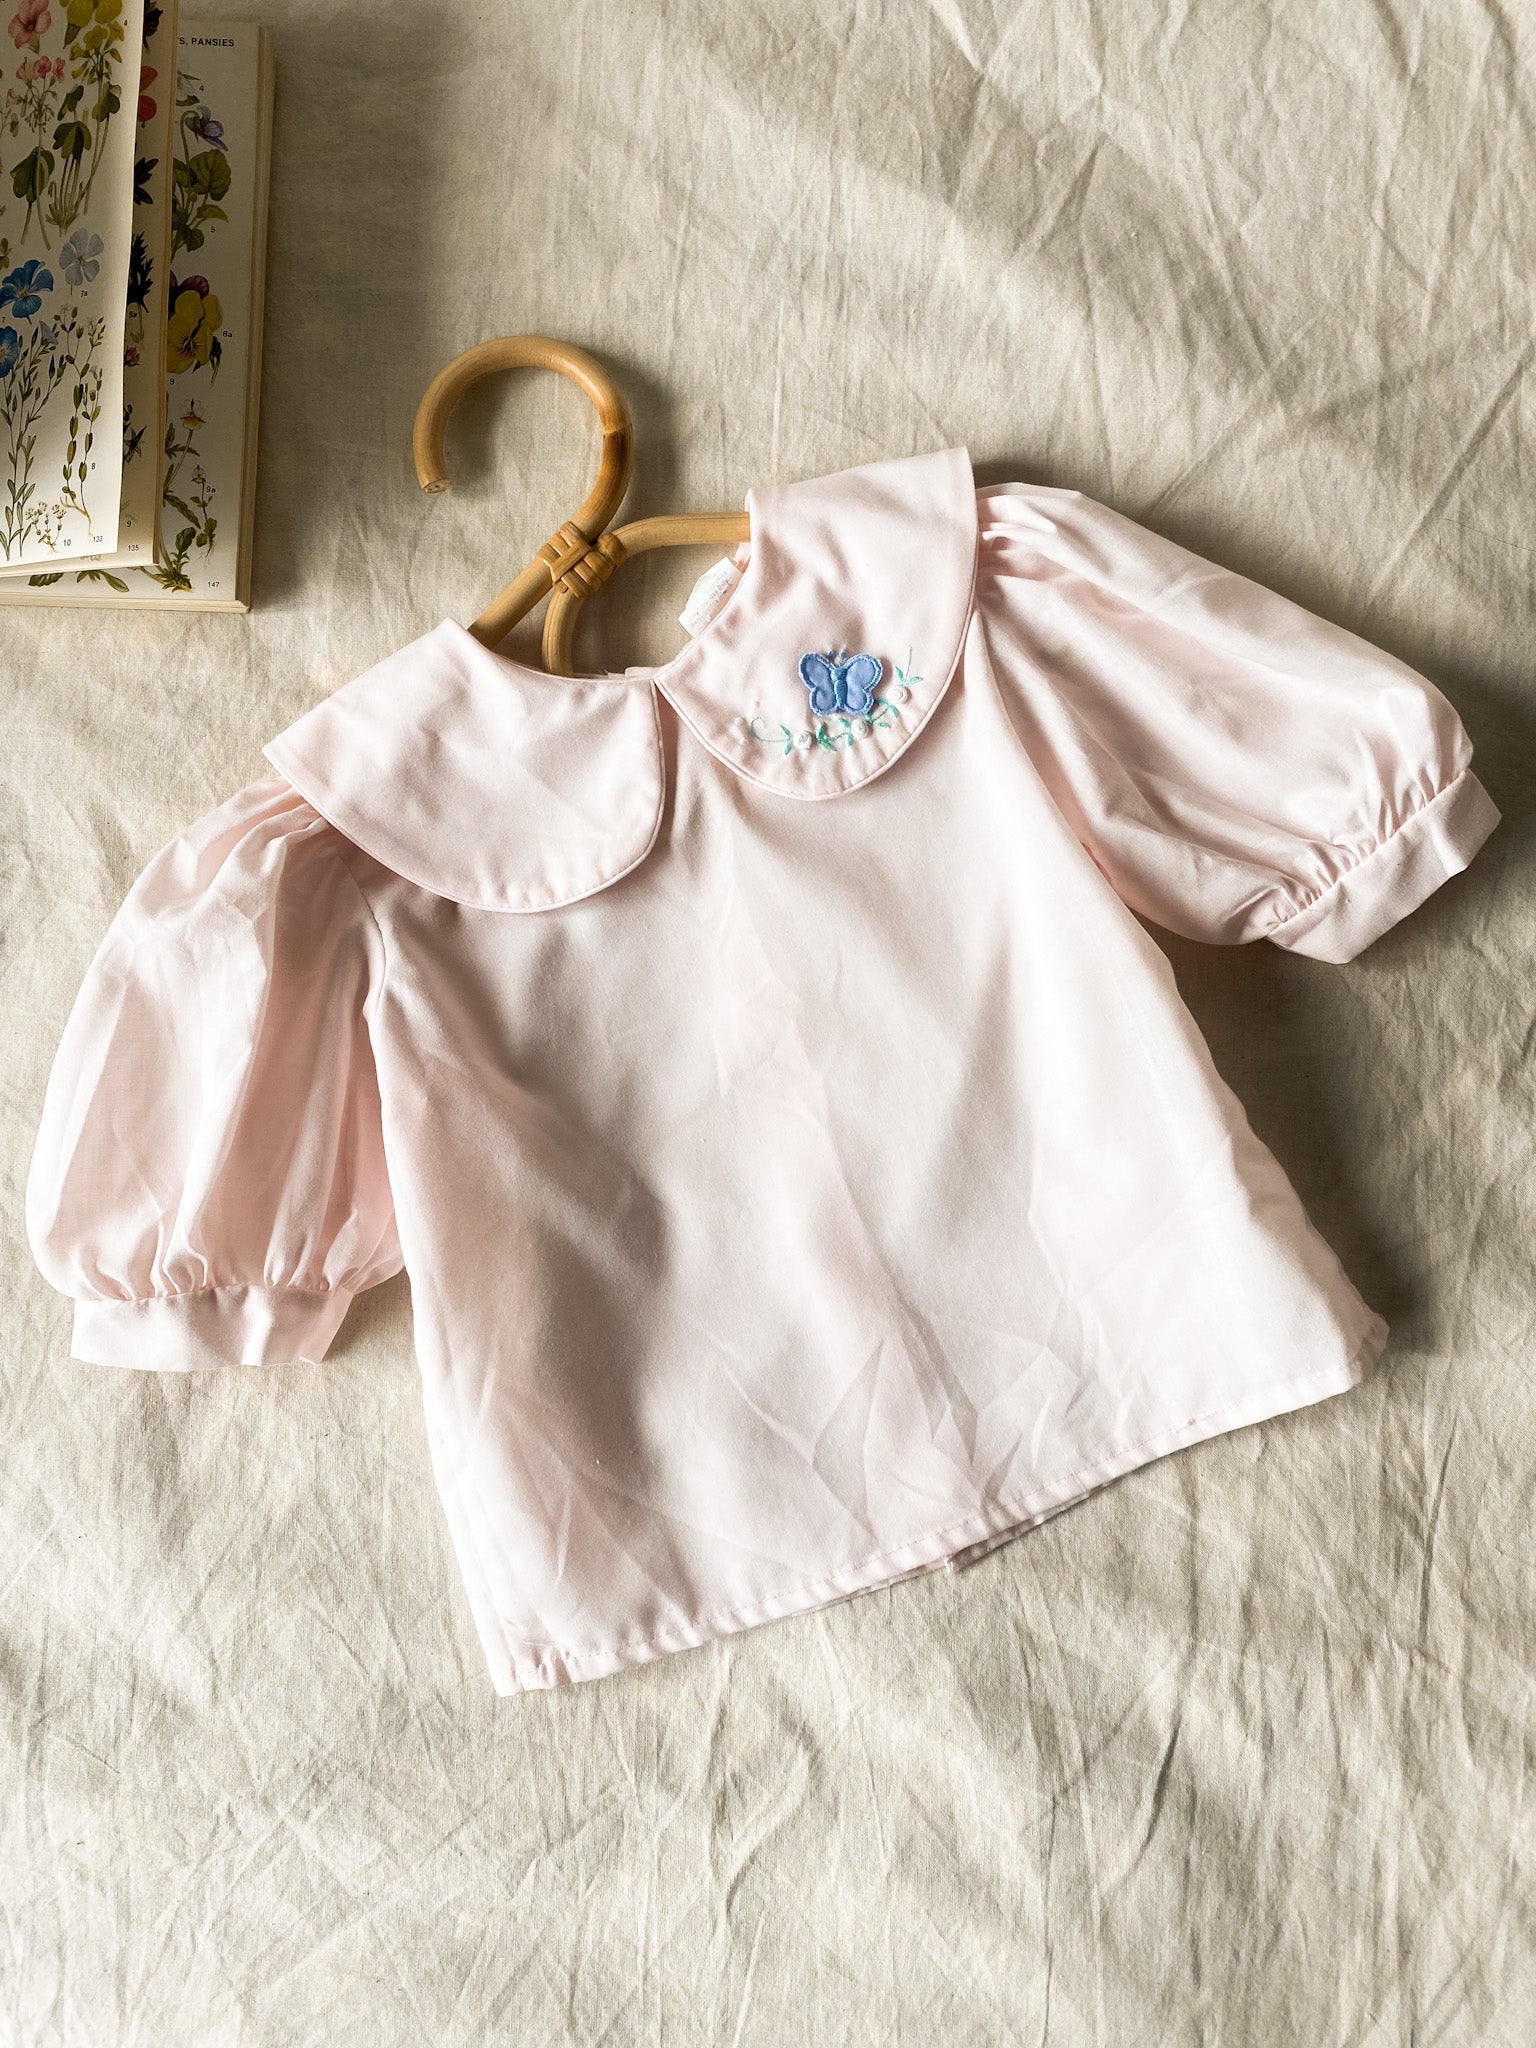 Vintage Butterfly Collar Blouse, approx 2-3 years